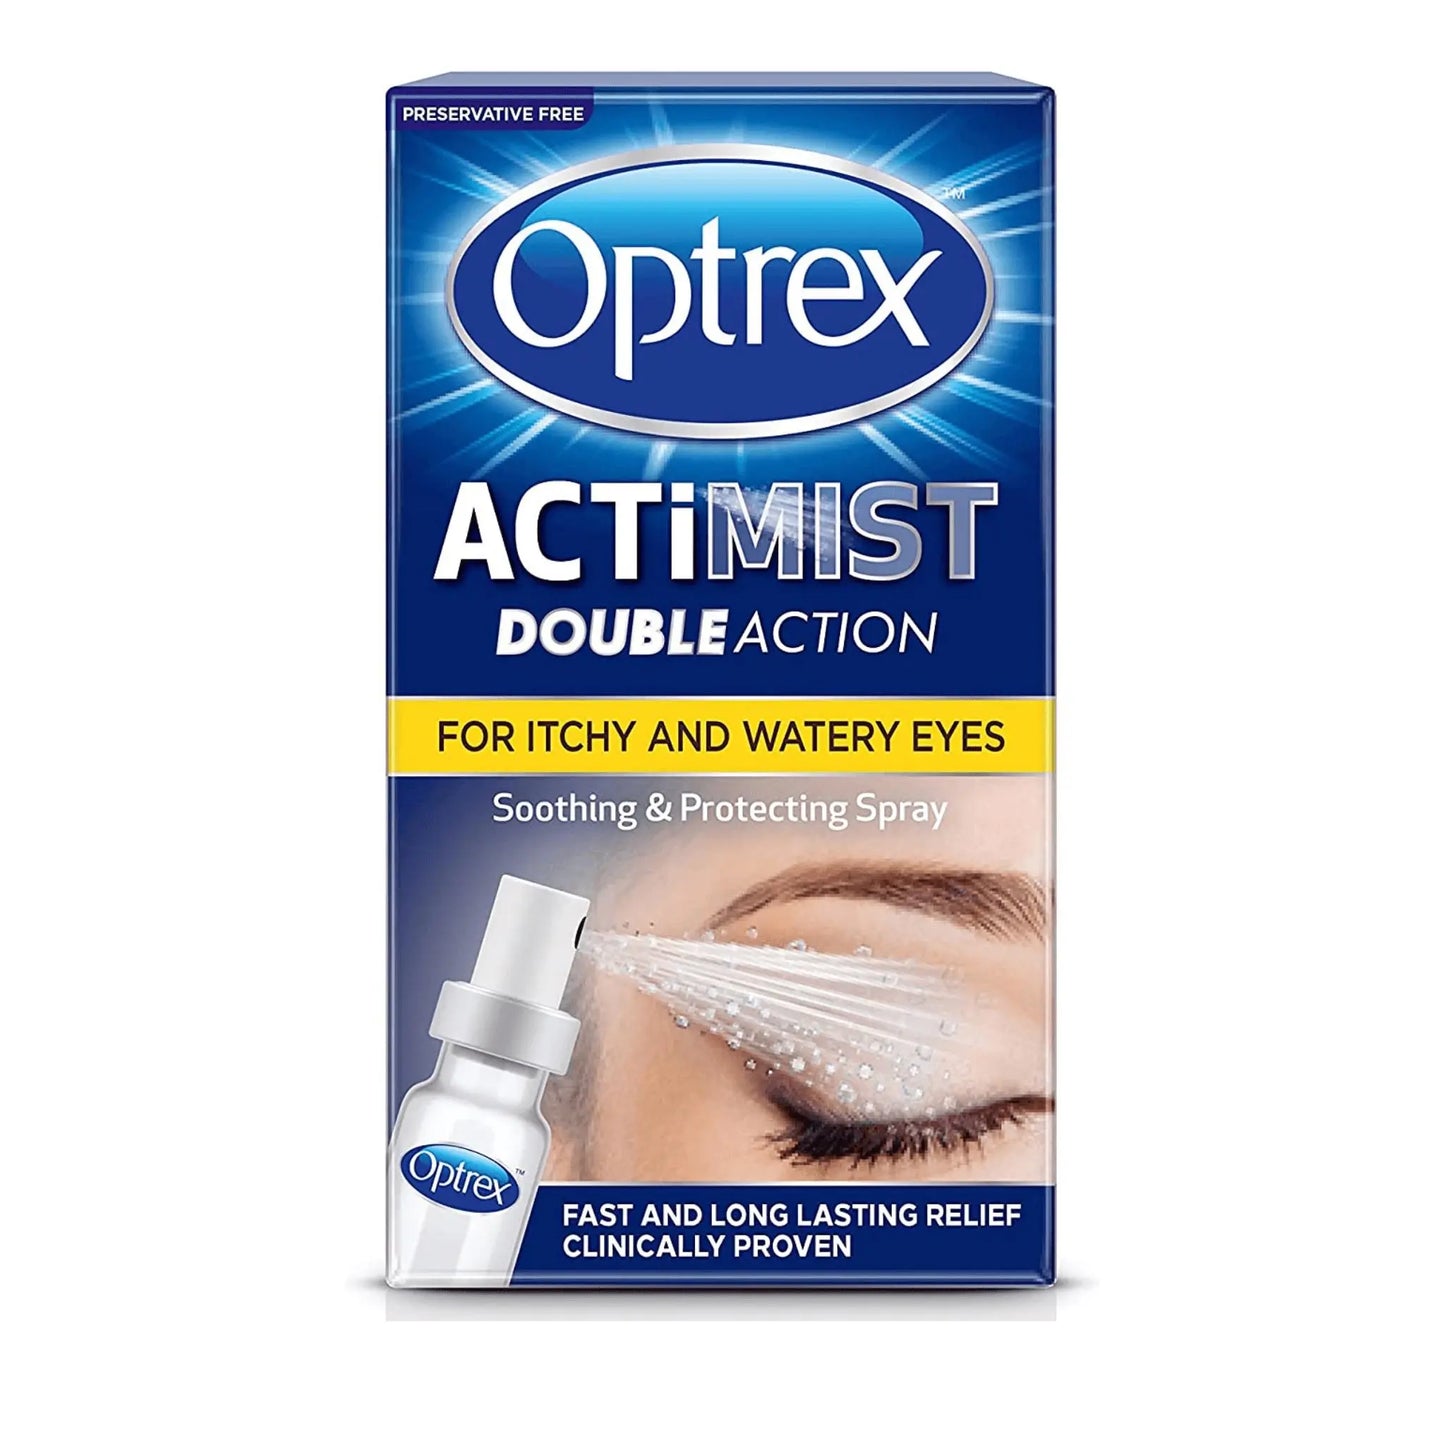 Optrex Actimist Eye Spray For Itchy & Watery Eyes 10ml